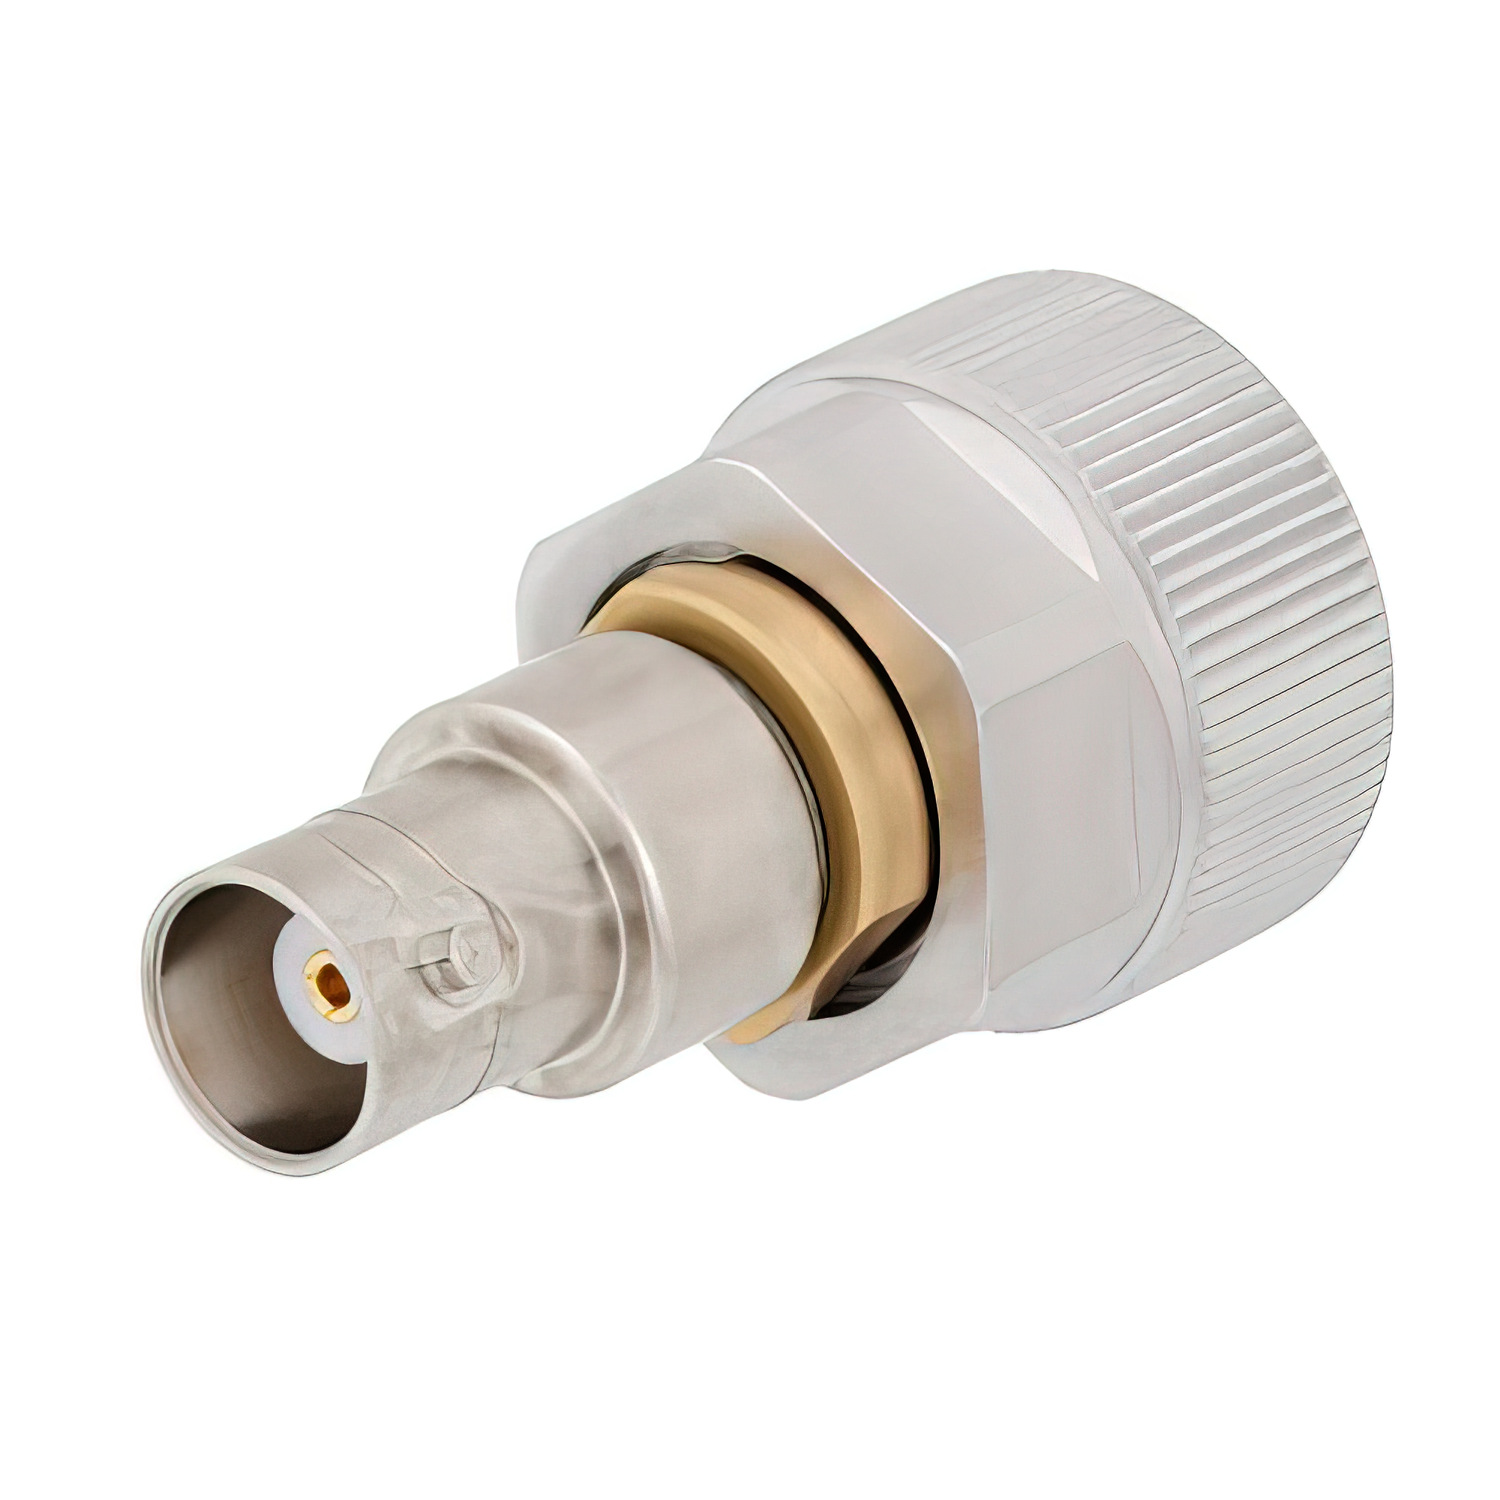 Precision 7mm to BNC Female Adapter1